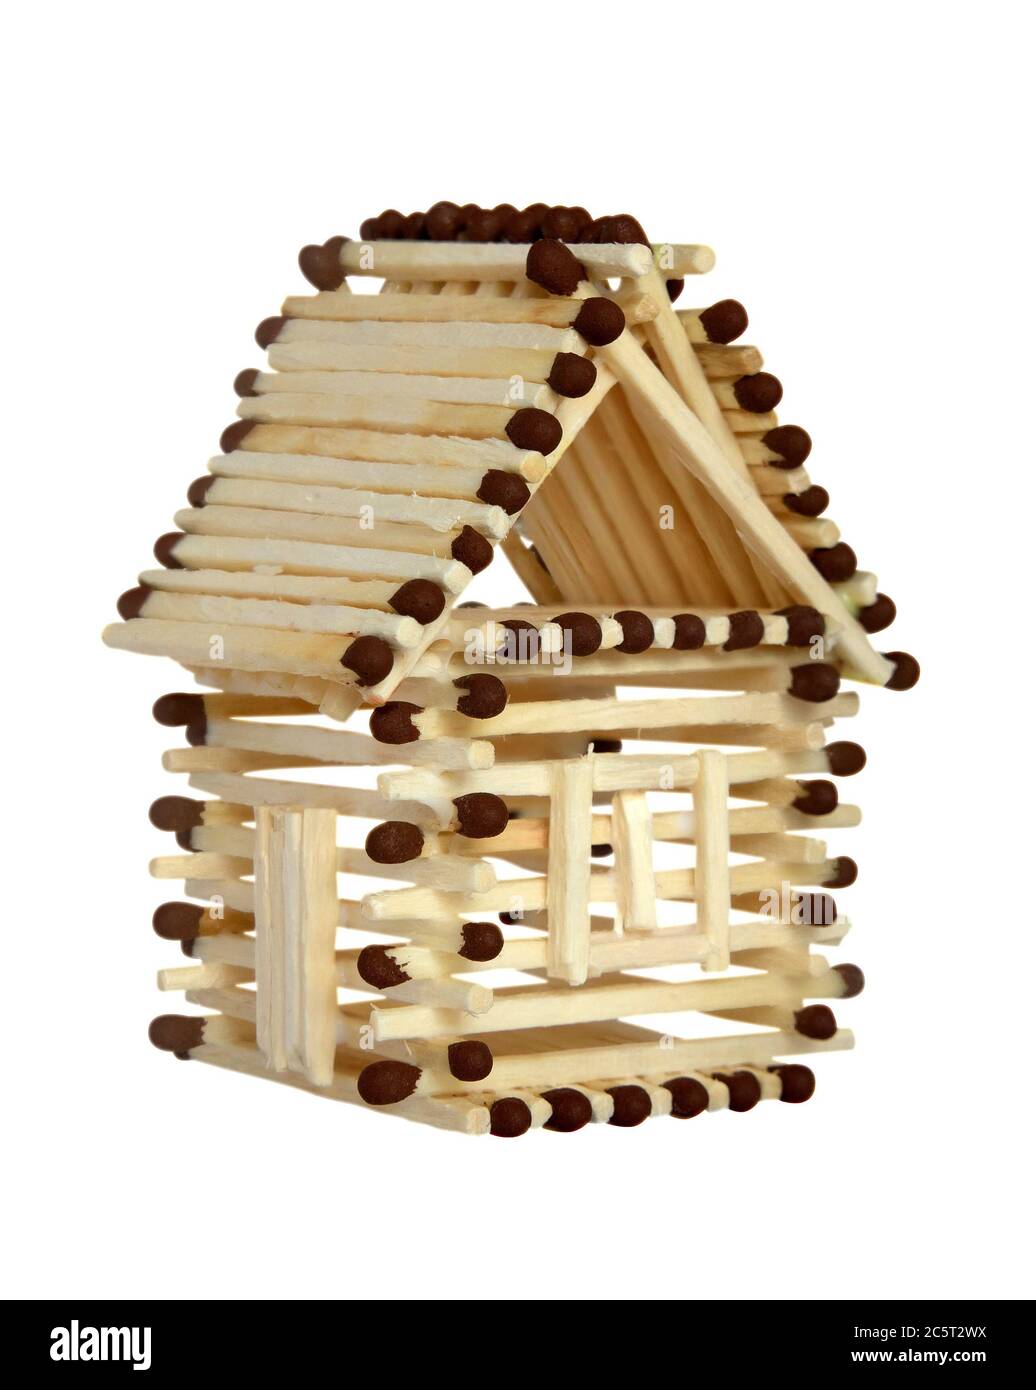 Log house from matches pattern isolated on white. Clipping path included. Stock Photo